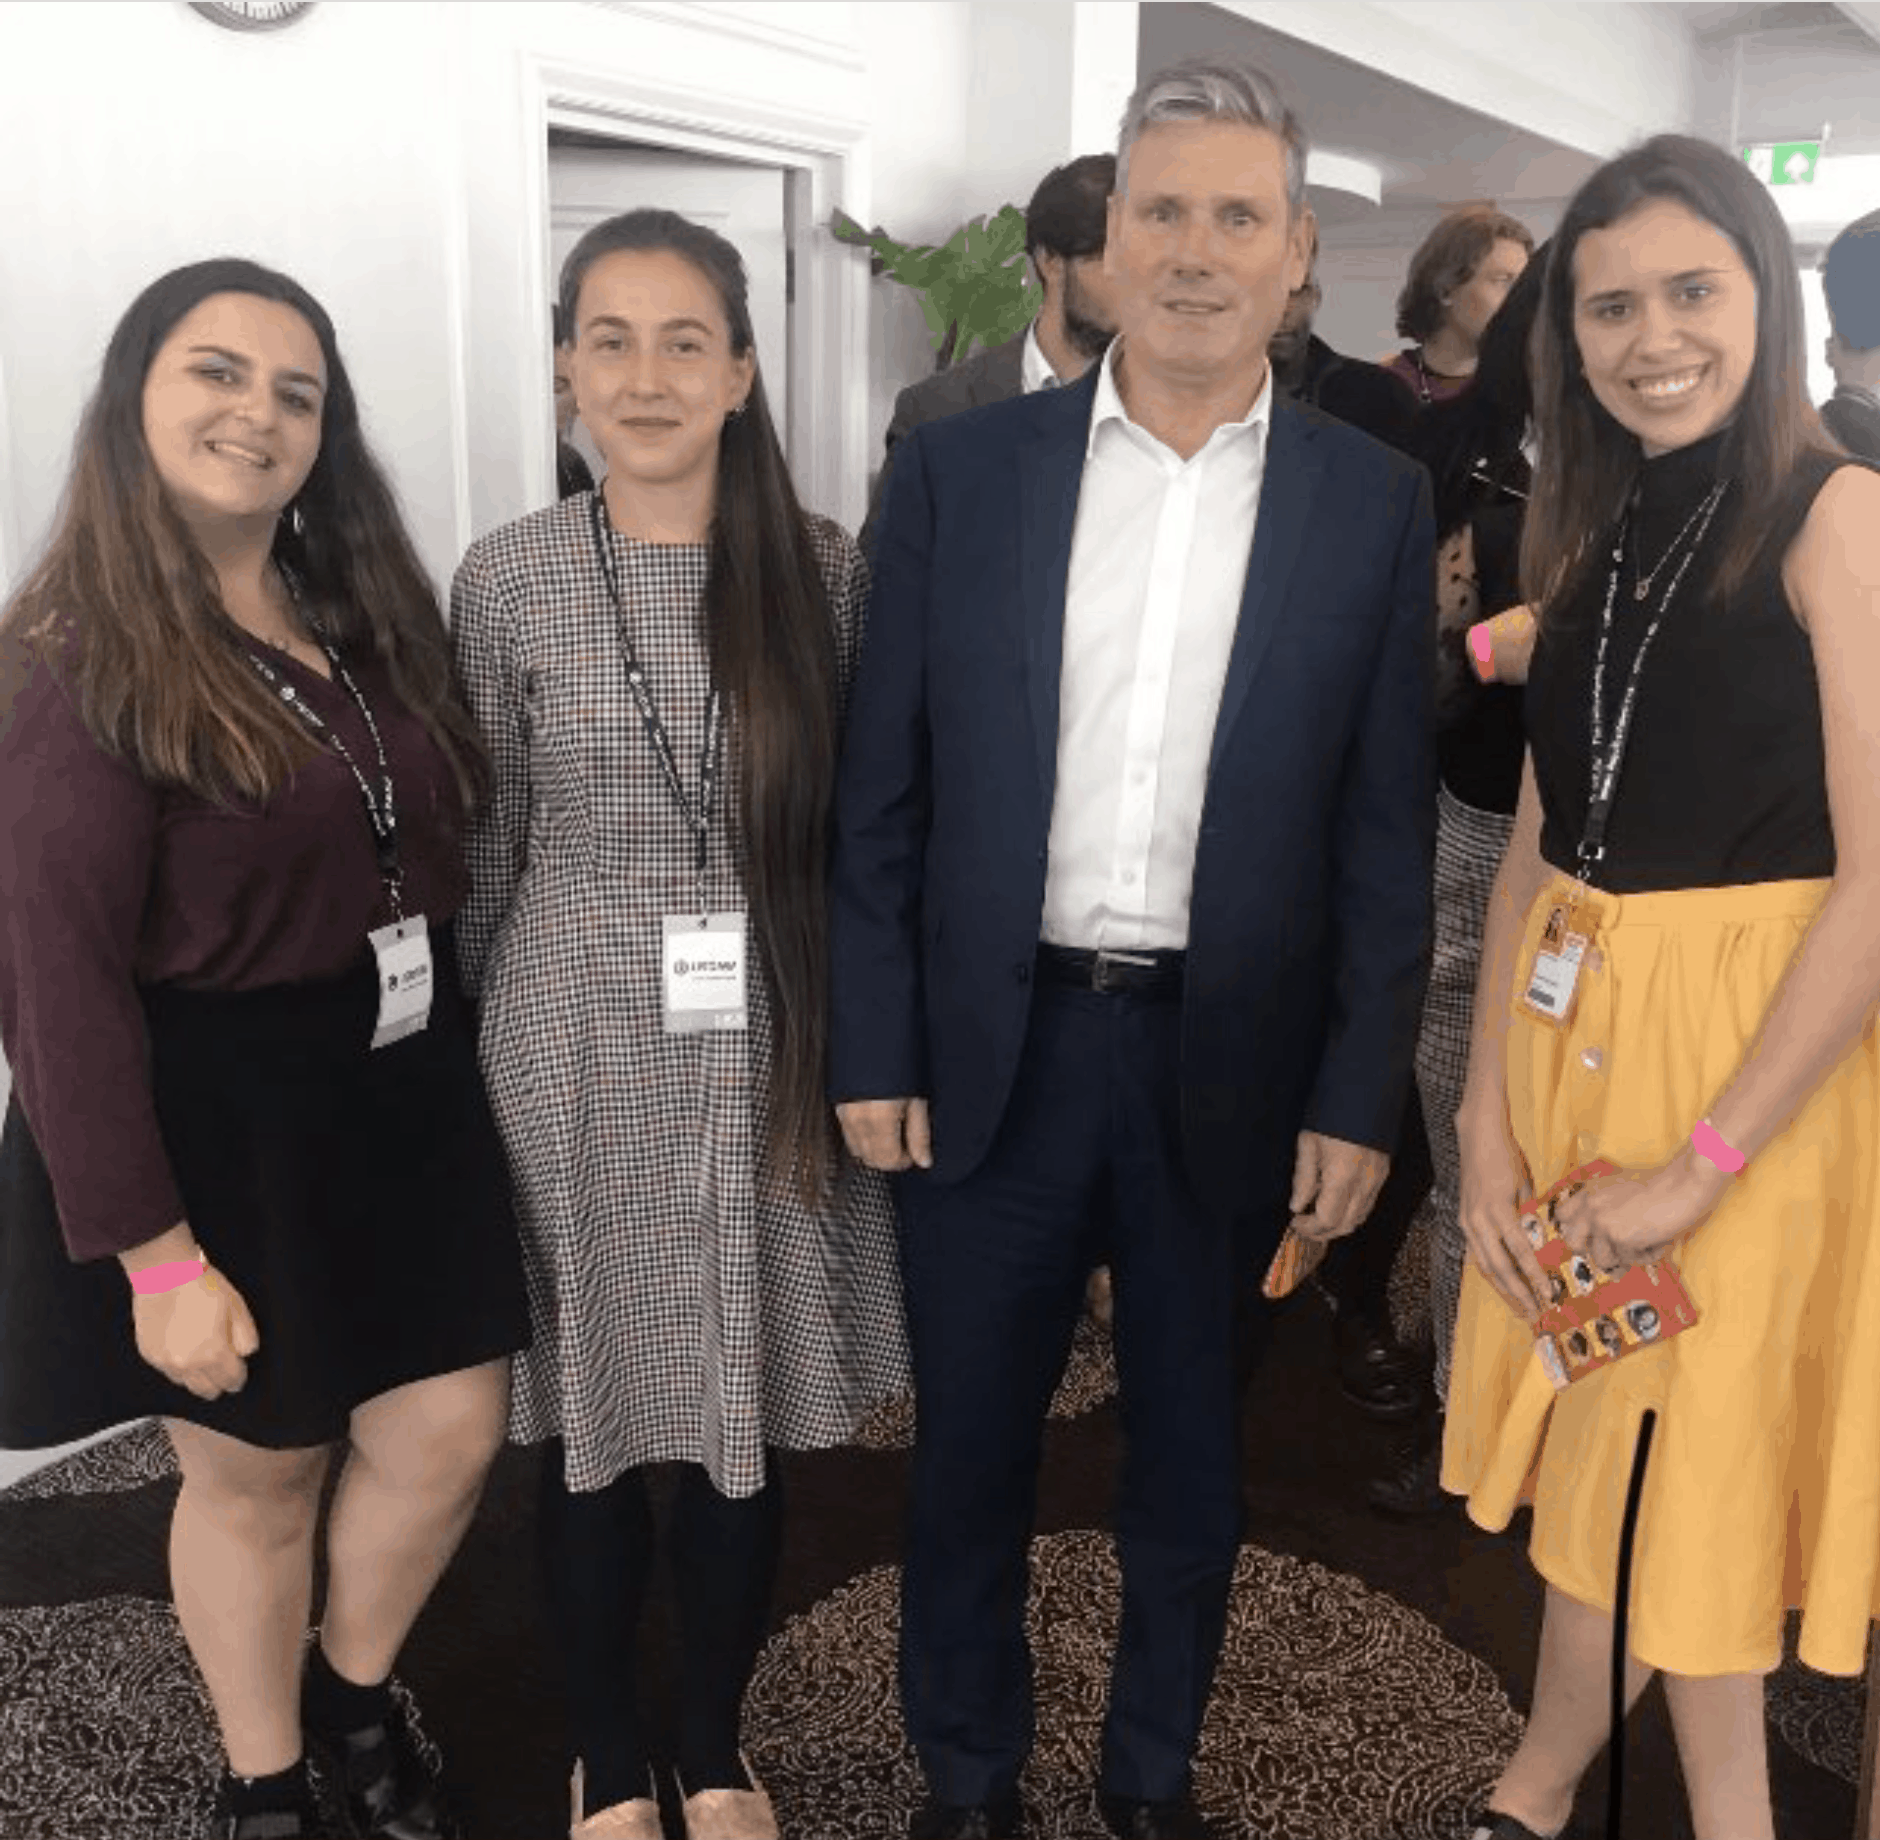 Alexandra Bulat (middle) and Keir Starmer at the Labour Party conference 2021